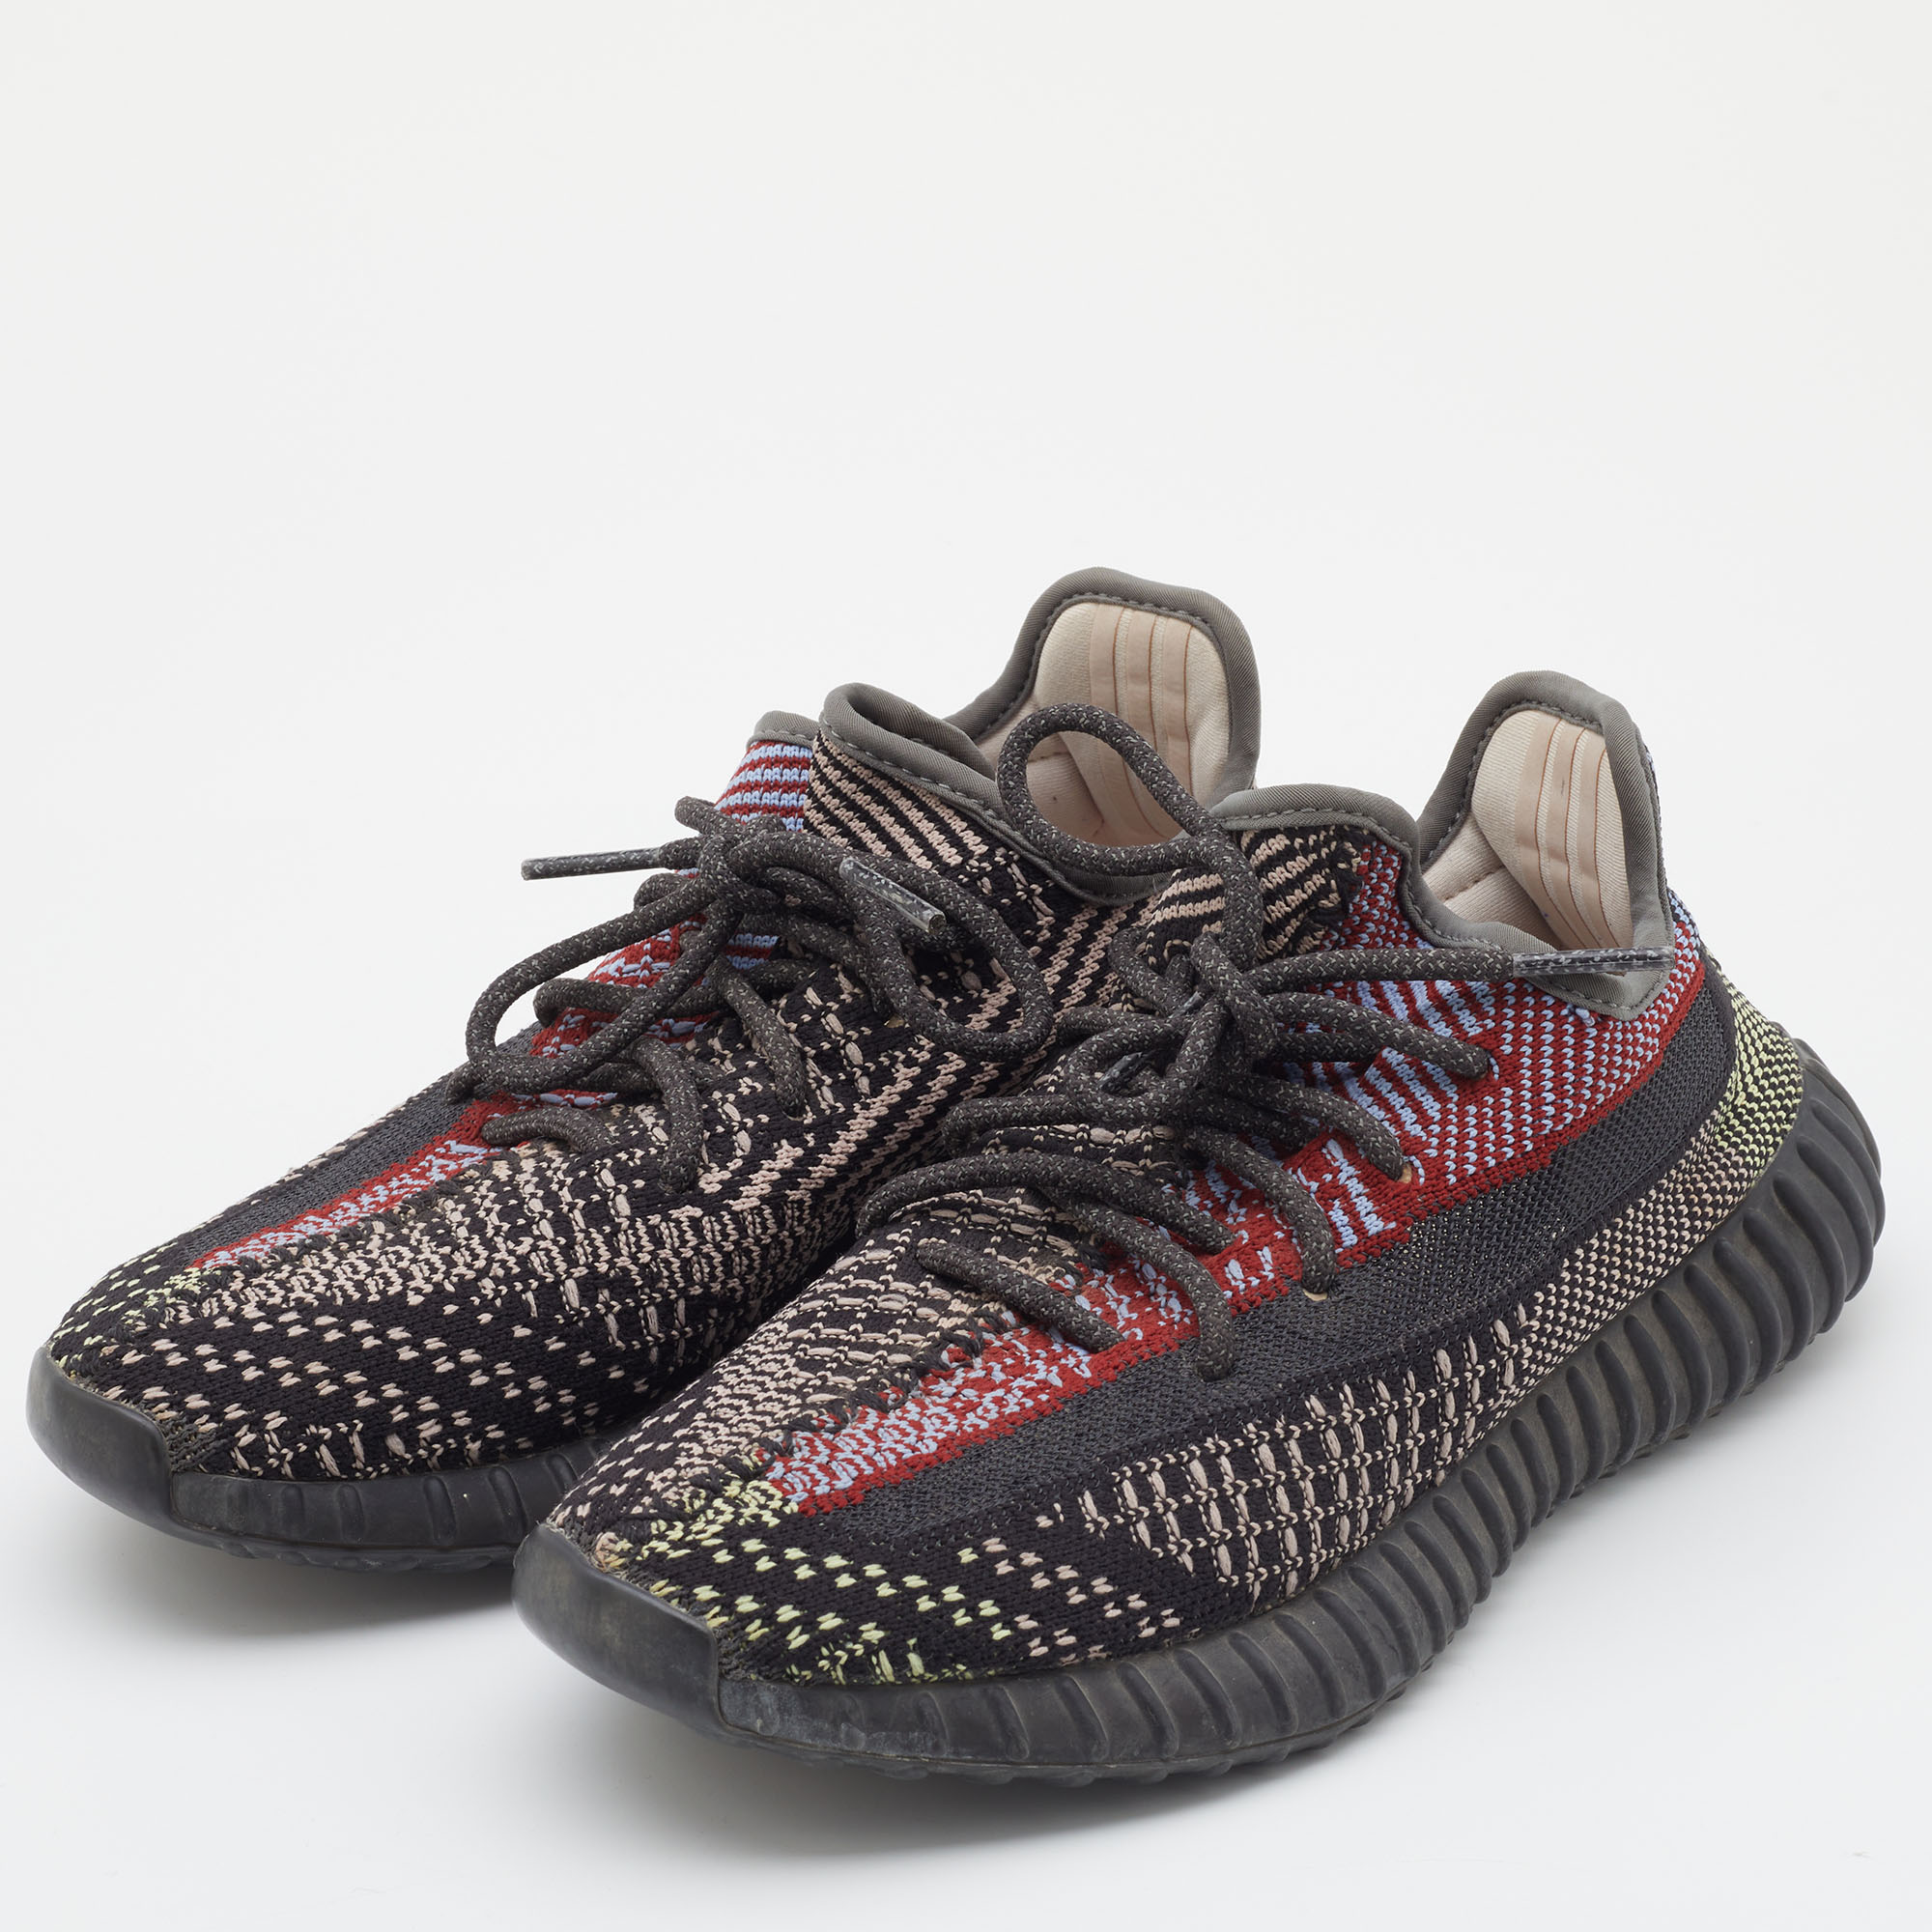 

Adidas Yeezy Boost Black Knit Fabric 350 V2 Yecheil (Non-Reflective) Sneakers Size 38 2/3